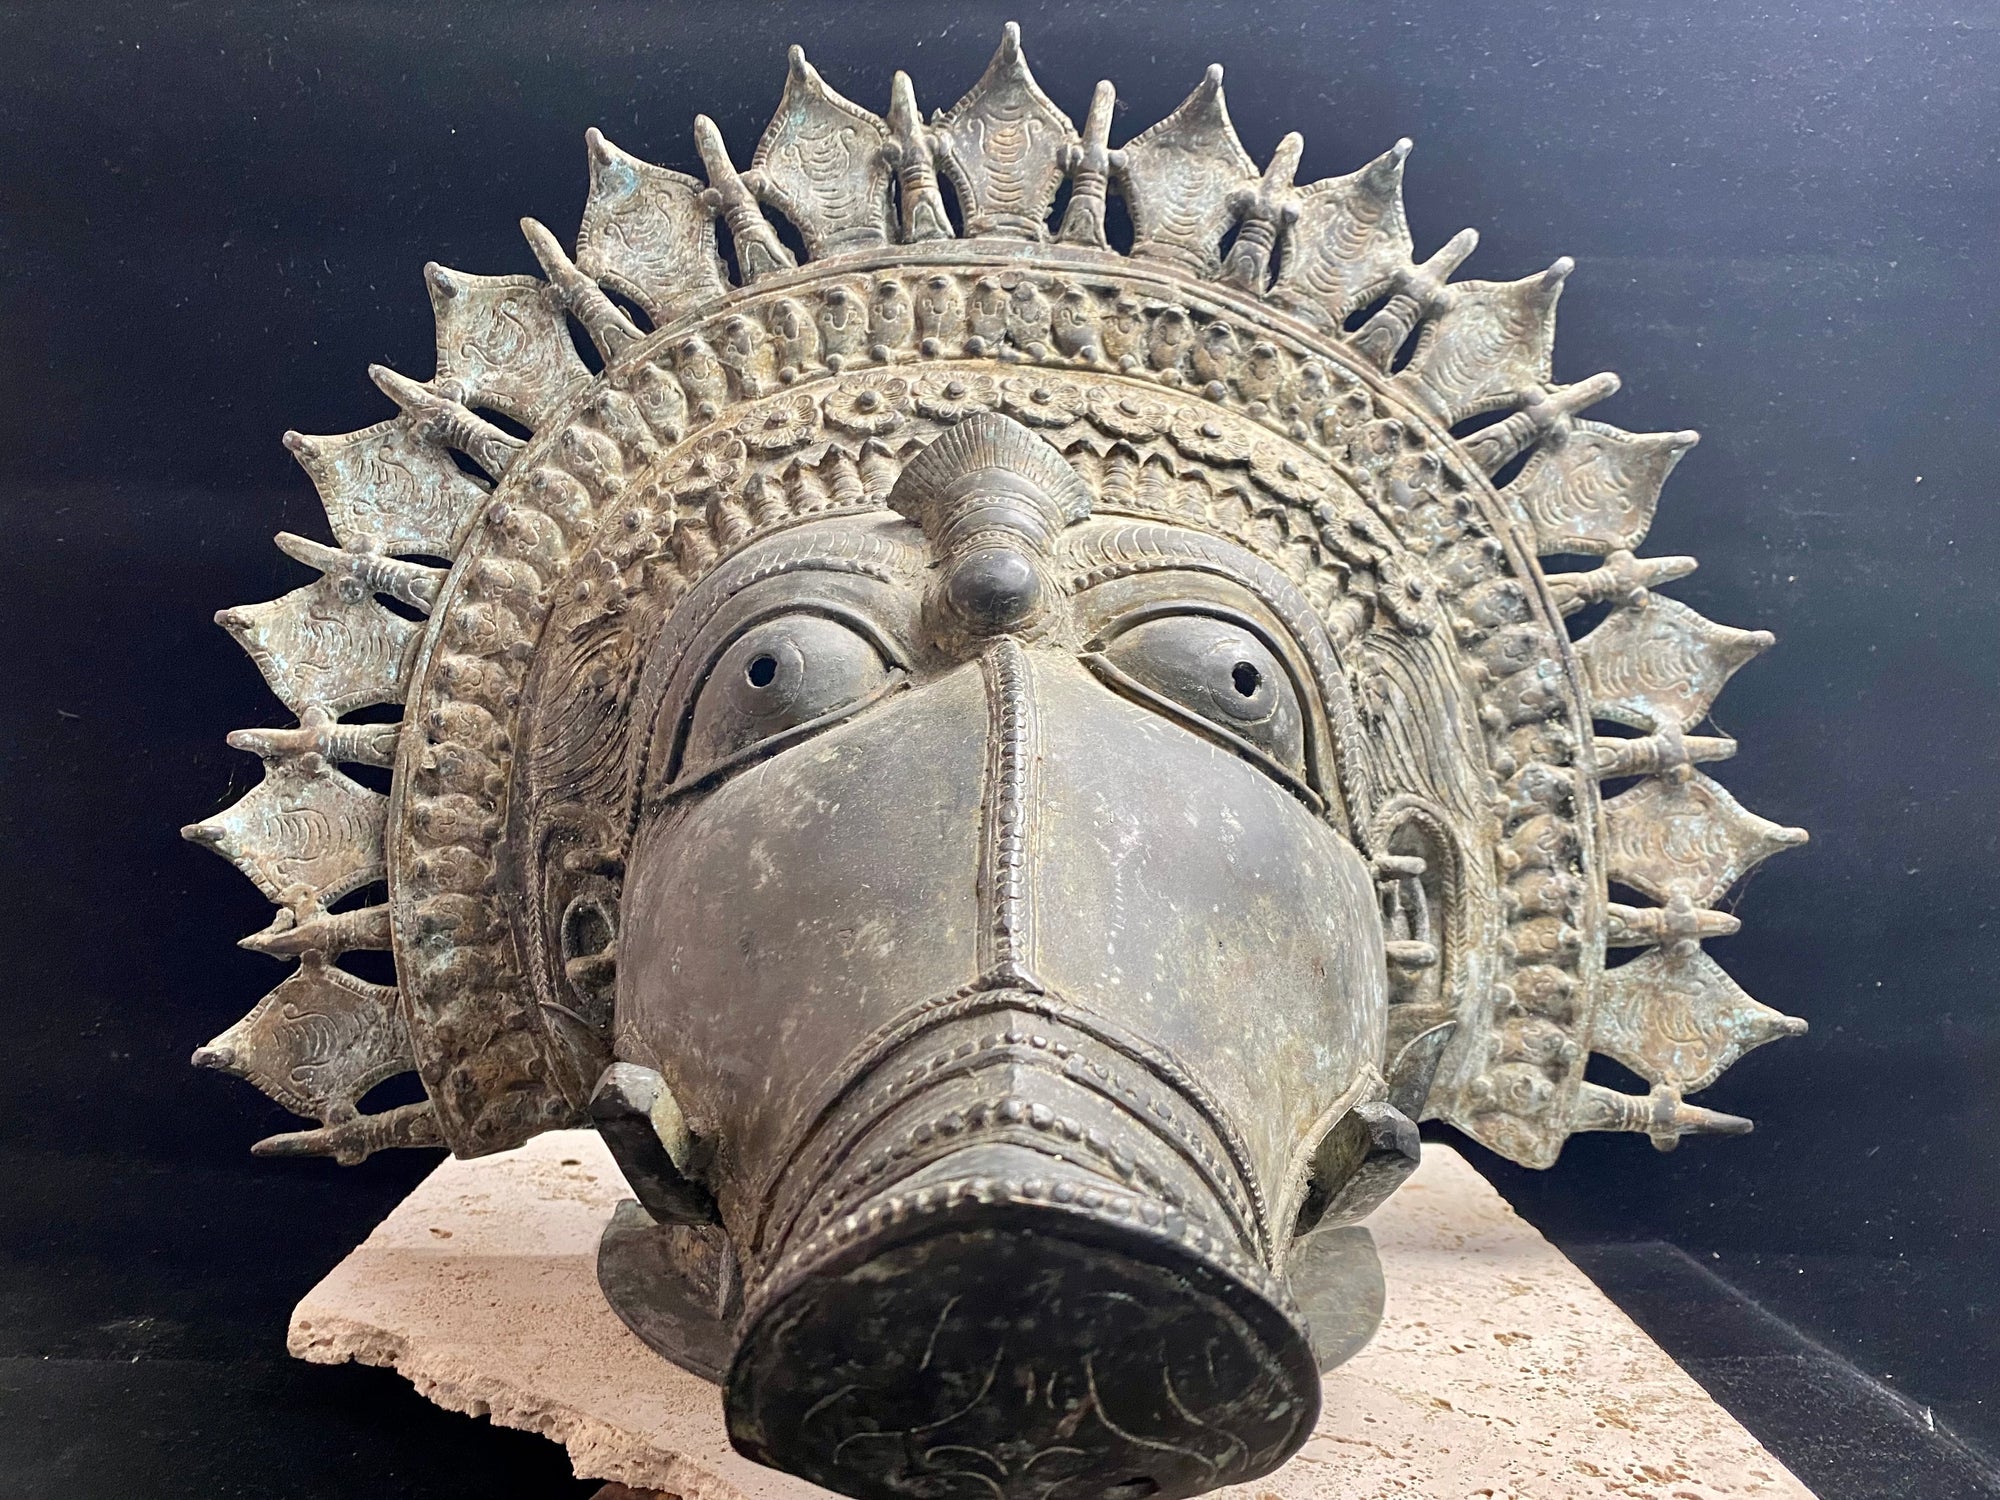 Ceremonial dancer's headpiece worn as a mask in the form of Vishnu's incarnation as Varaha. For ritual use in annual Dharmanema dance festivals. Early 20th century. Bronze lost wax casting. From Kerala, southern India. Measurements: Width 51 cm, height 43 cm, depth 32 cm.